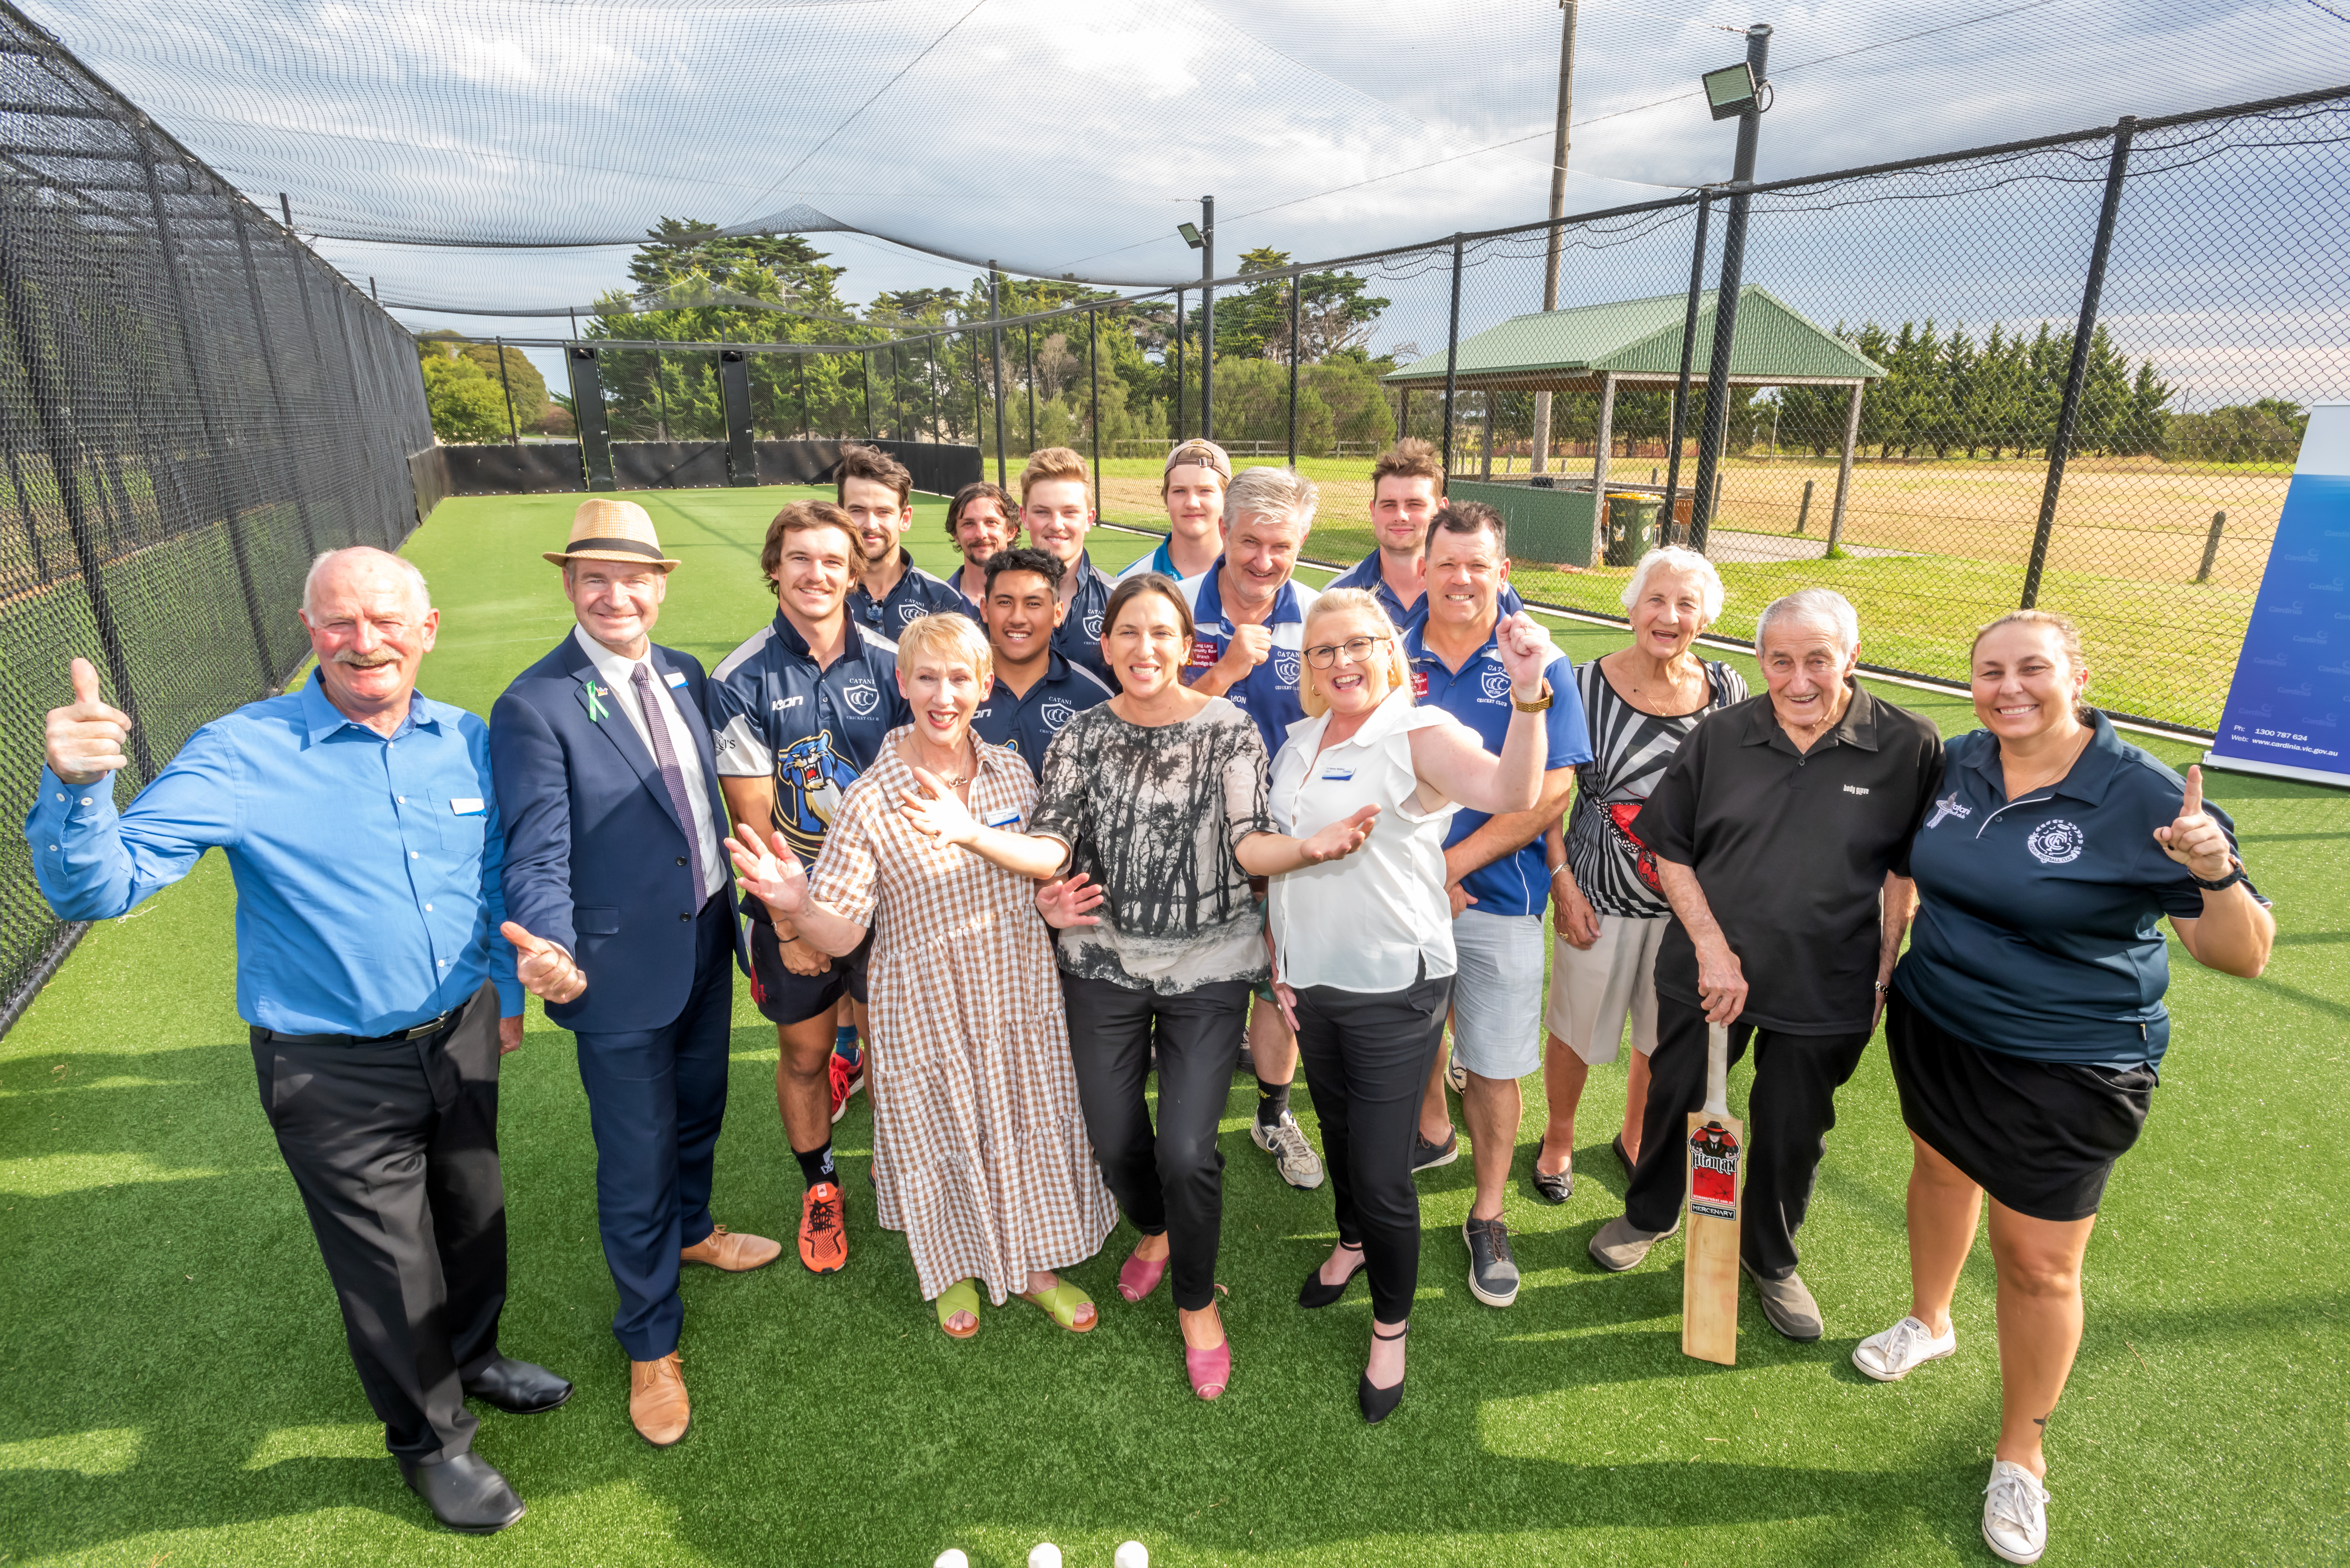 (From left): Cr Graeme Moore, Cr Collin Ross, Cr Kaye Cameron, Jordan Crugnale MP, Mayor Cr Tammy Radford with members of the Catani Cricket and Netball Clubs.